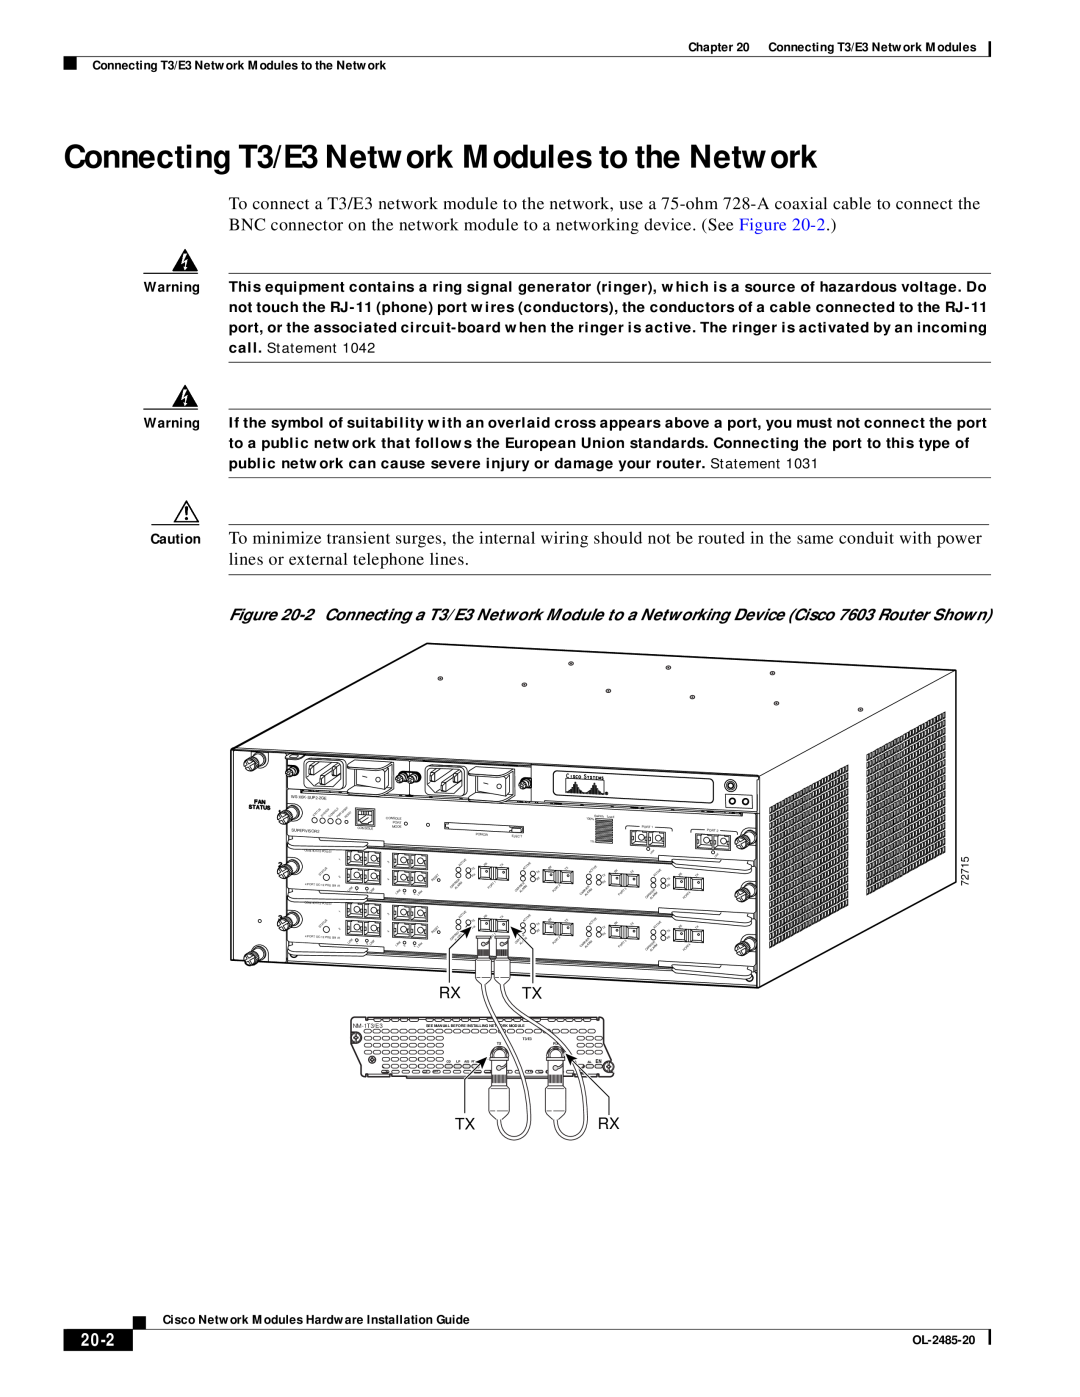 Cisco Systems OL-2485-20 manual Connecting T3/E3 Network Modules to the Network, 20-2, Rx Tx, Txrx 